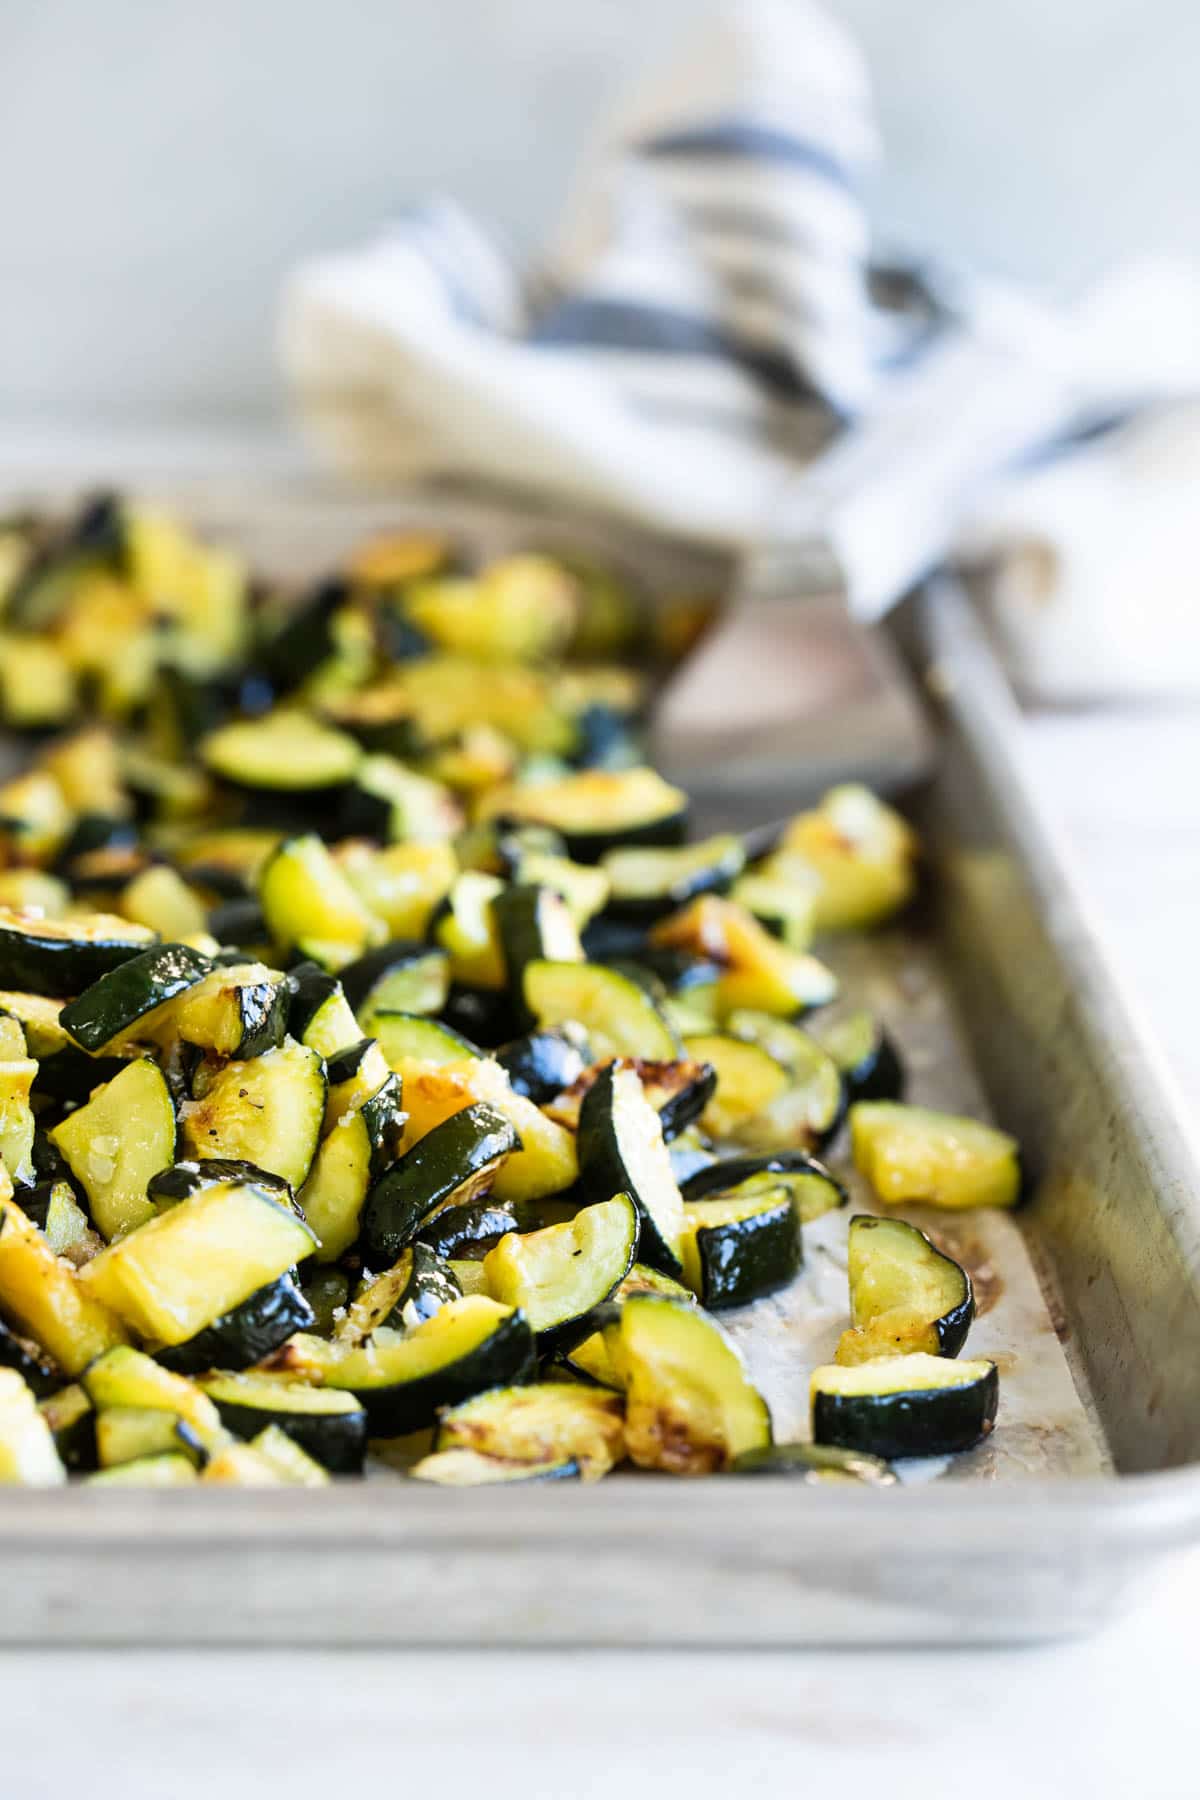 Roasted zucchini on a silver baking sheet.